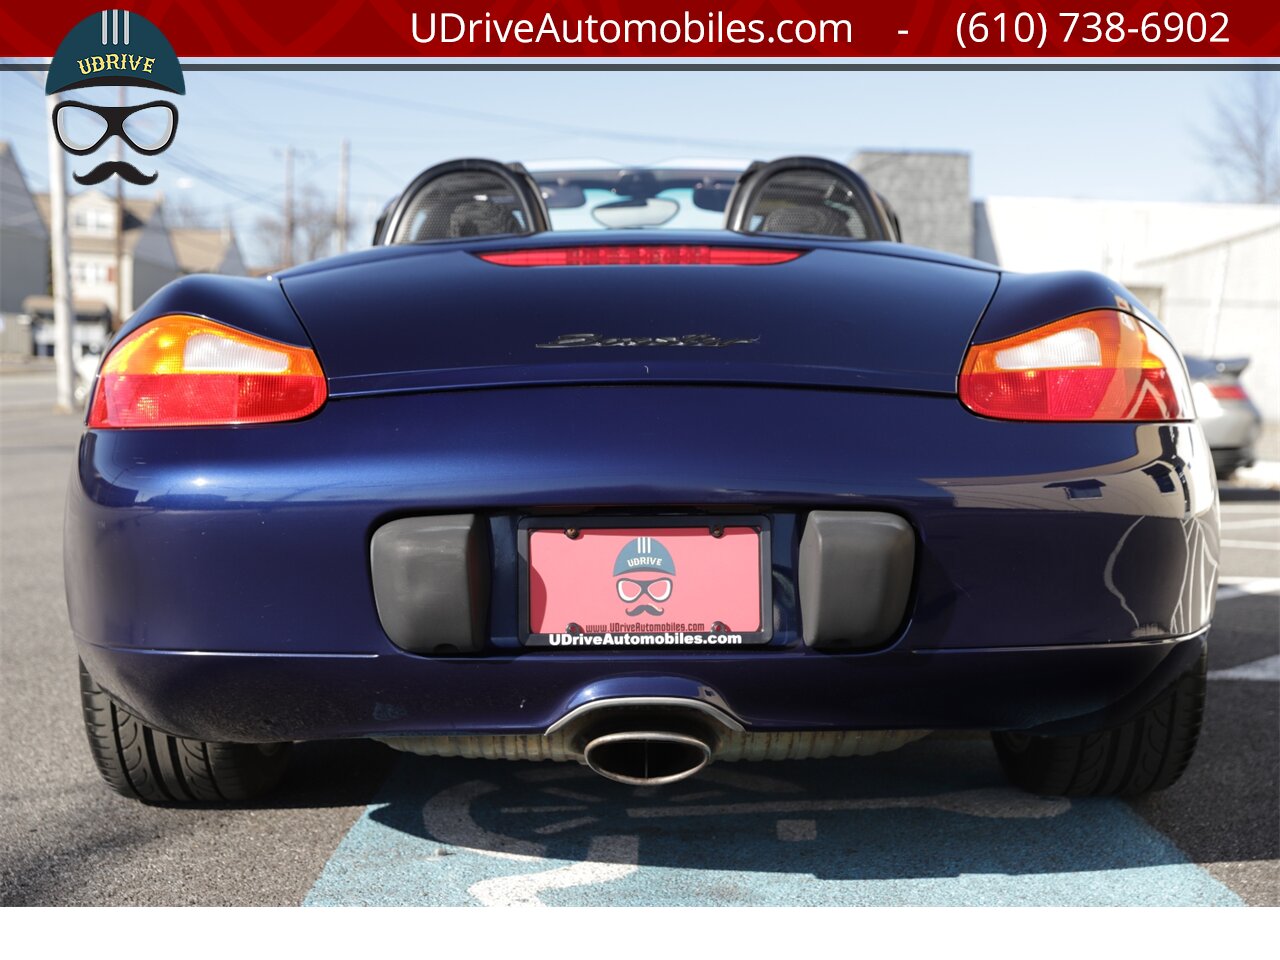 2001 Porsche Boxster 5 Speed Manual Detailed Service History  Same Owner for Last 18 Years Hard Top Included - Photo 17 - West Chester, PA 19382